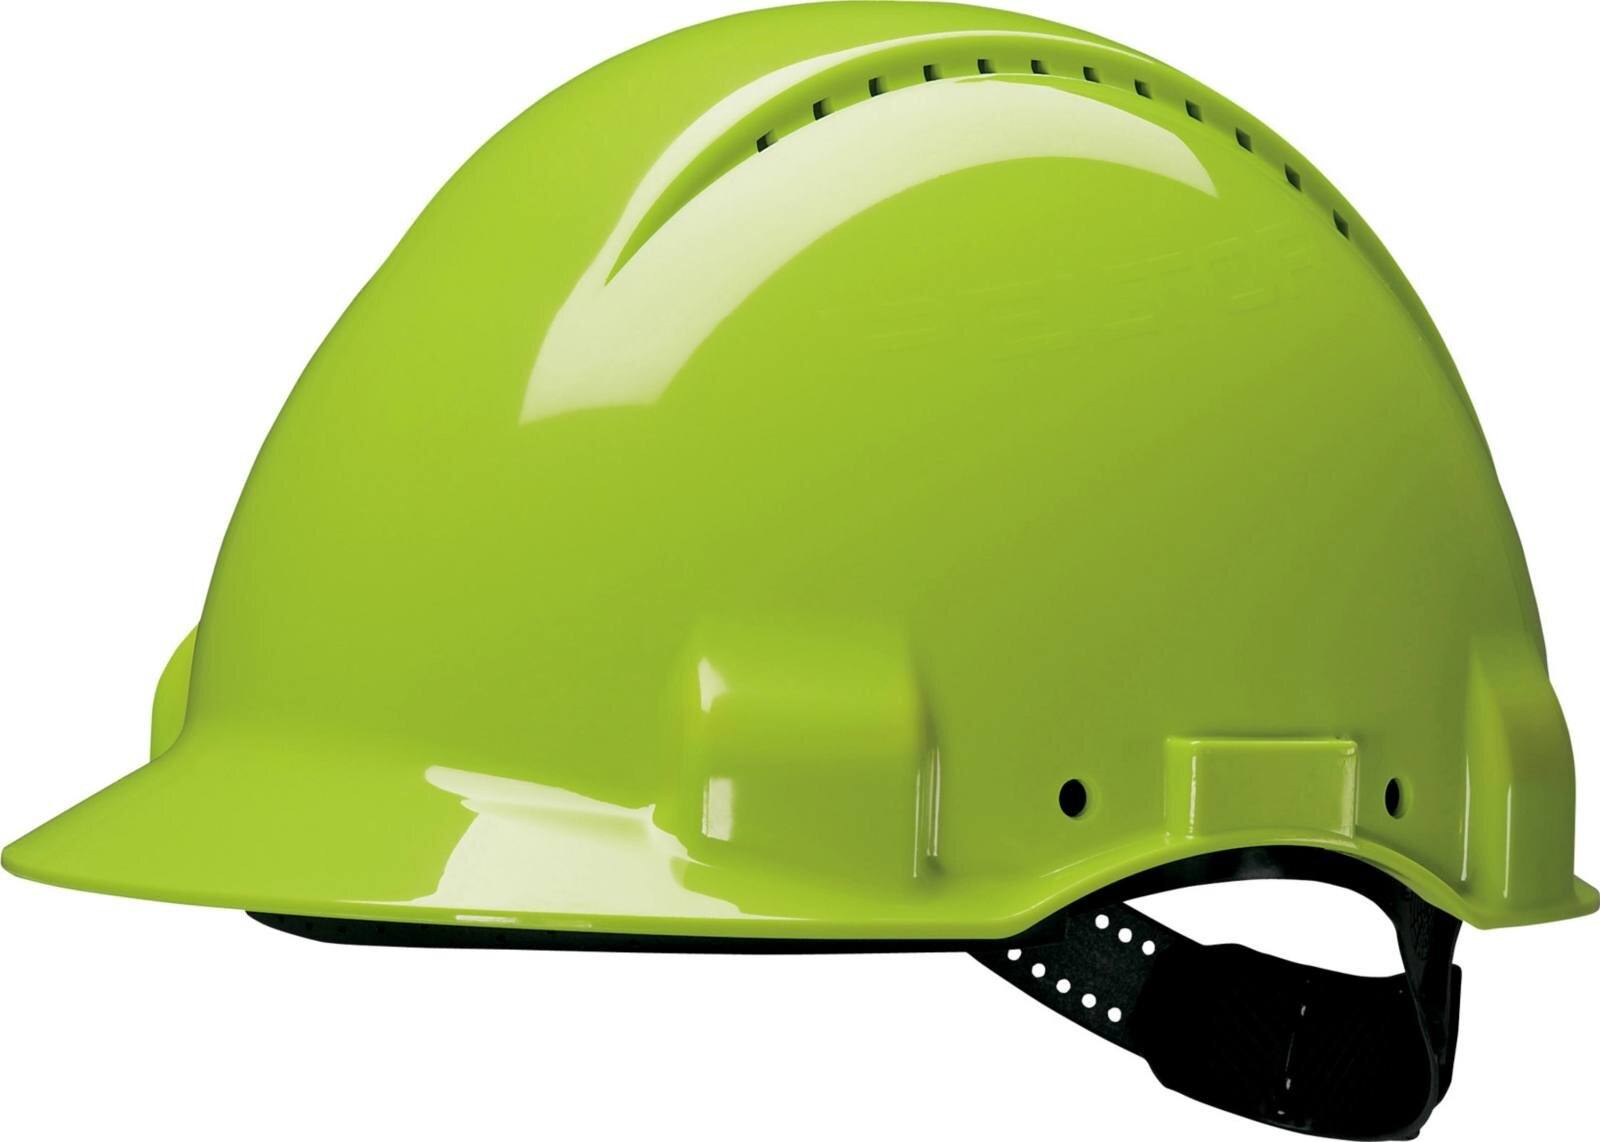 3M G3000 safety helmet G30DUV in neon green, ventilated, with uvicator, pinlock and leather sweatband